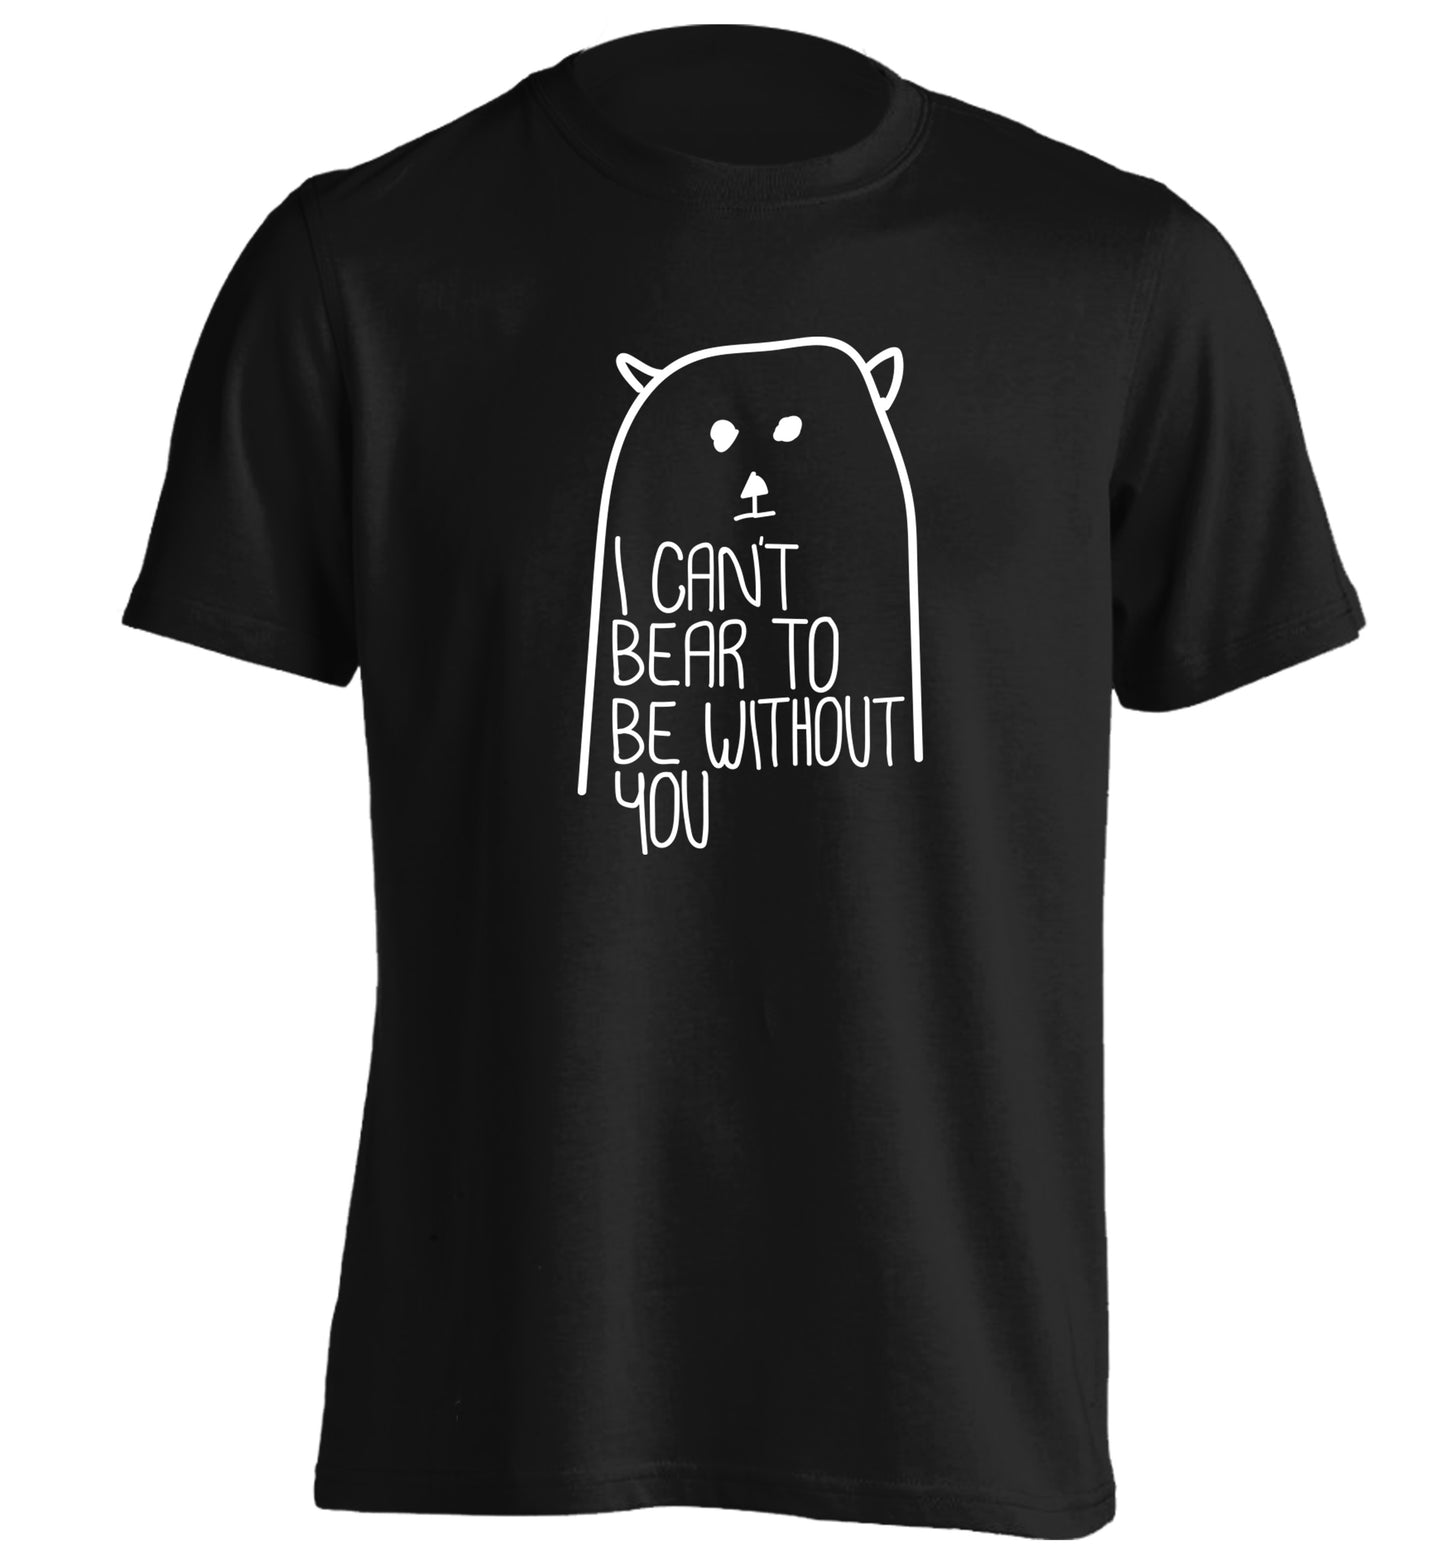 I can't bear to be without you adults unisex black Tshirt 2XL